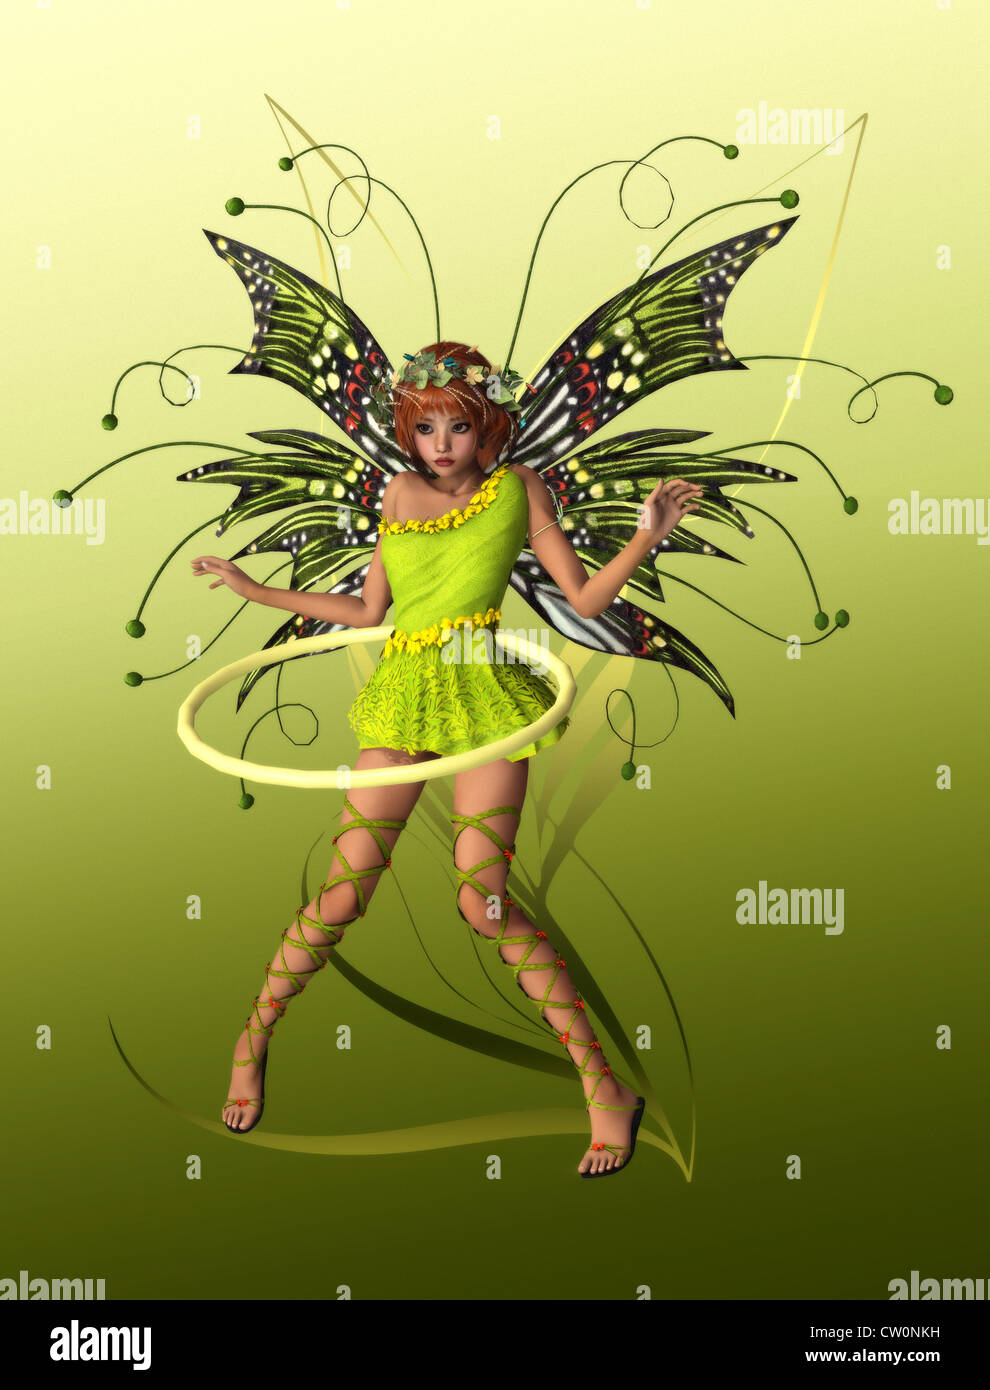 A cute fairy with wings, wreath and hula-hoop Stock Photo